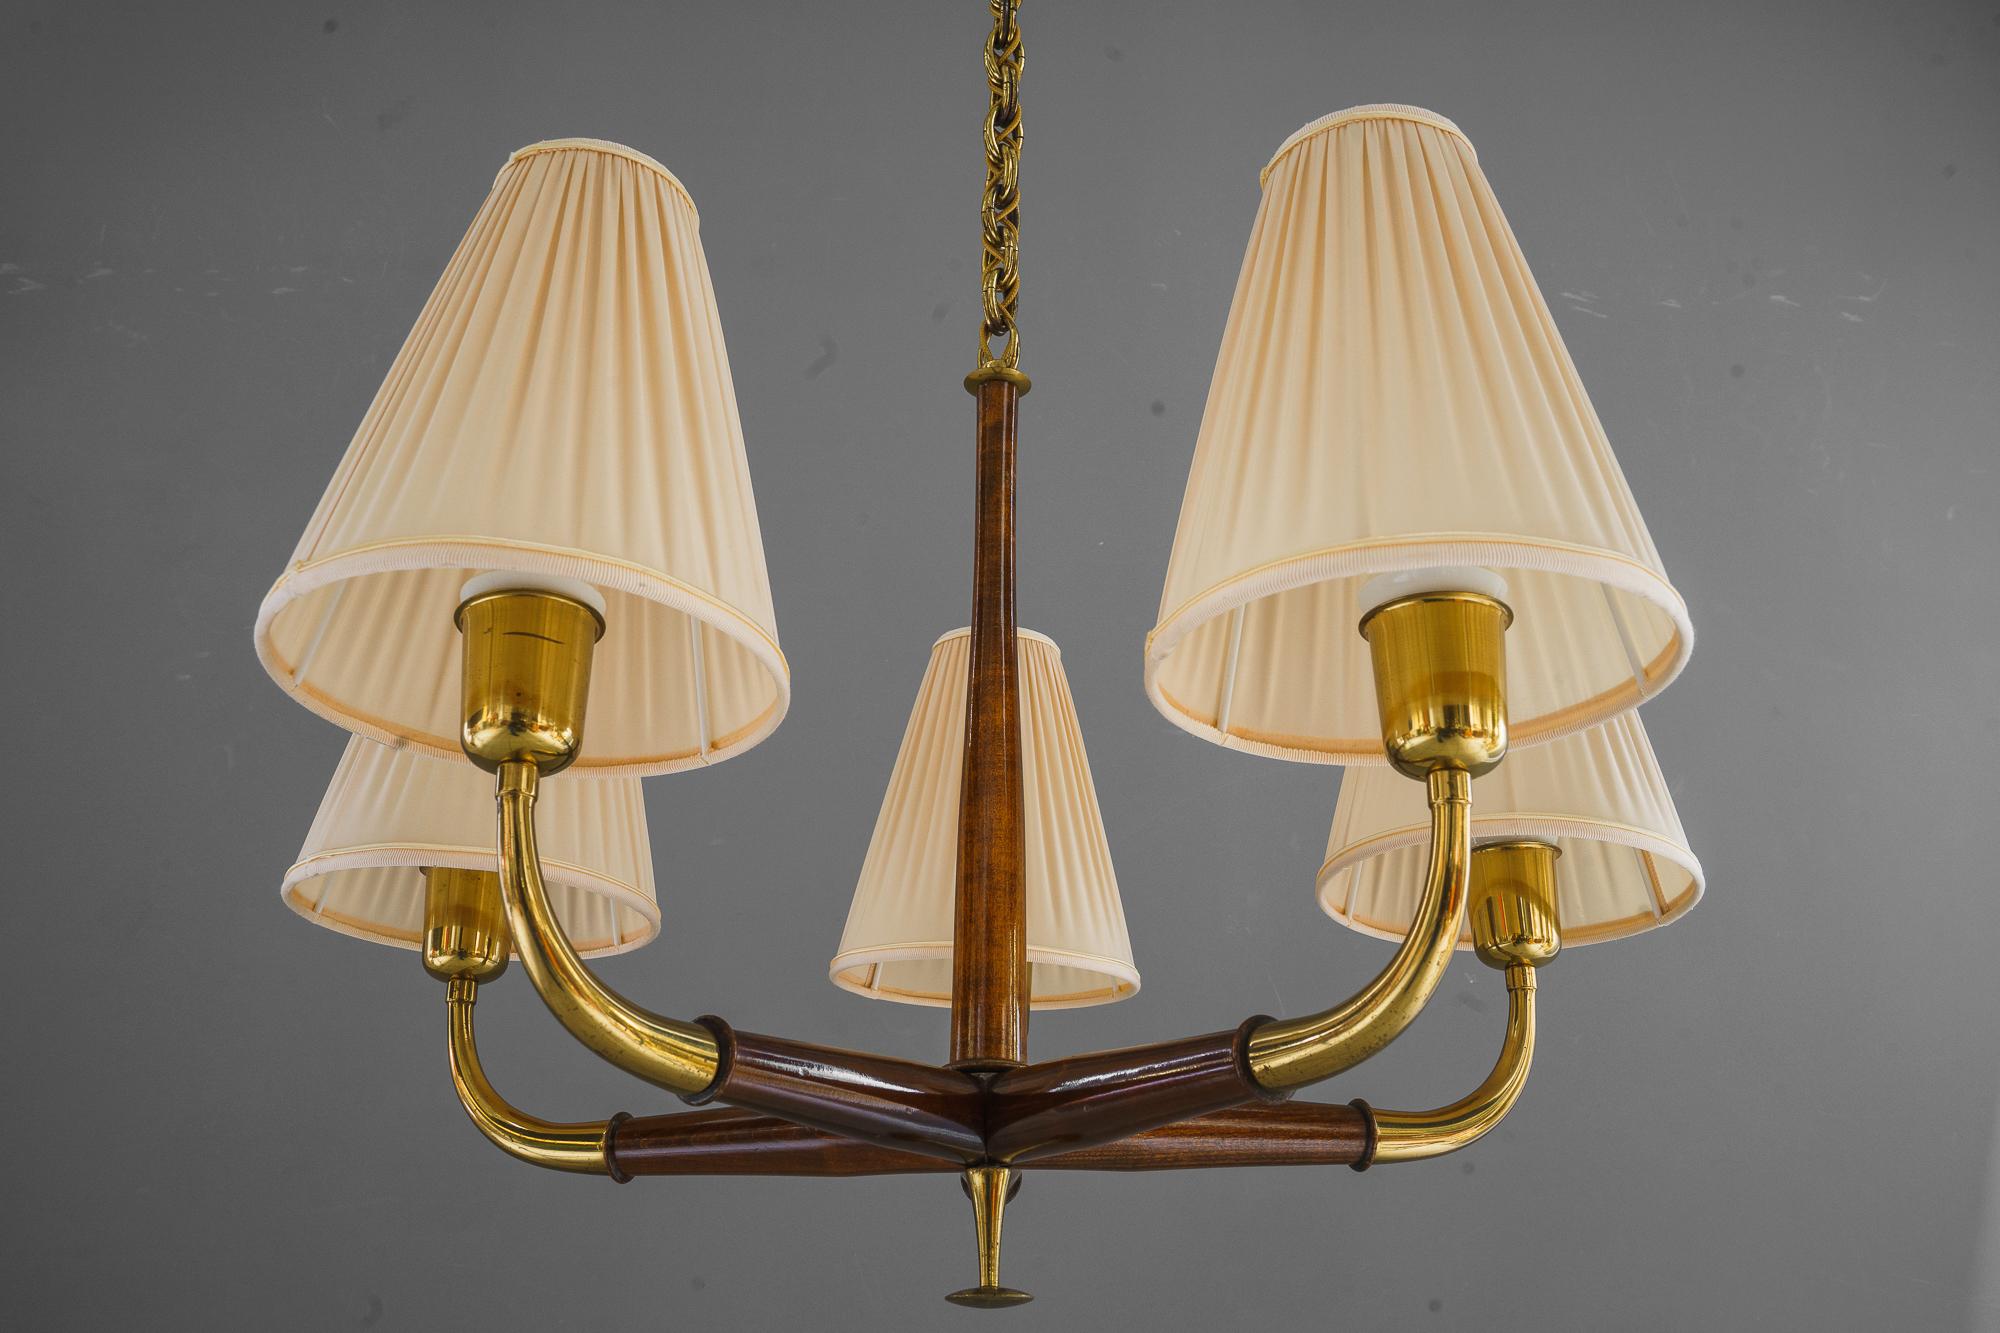 Mid-20th Century Chandelier by Josef Frank, 1930s with fabric shades